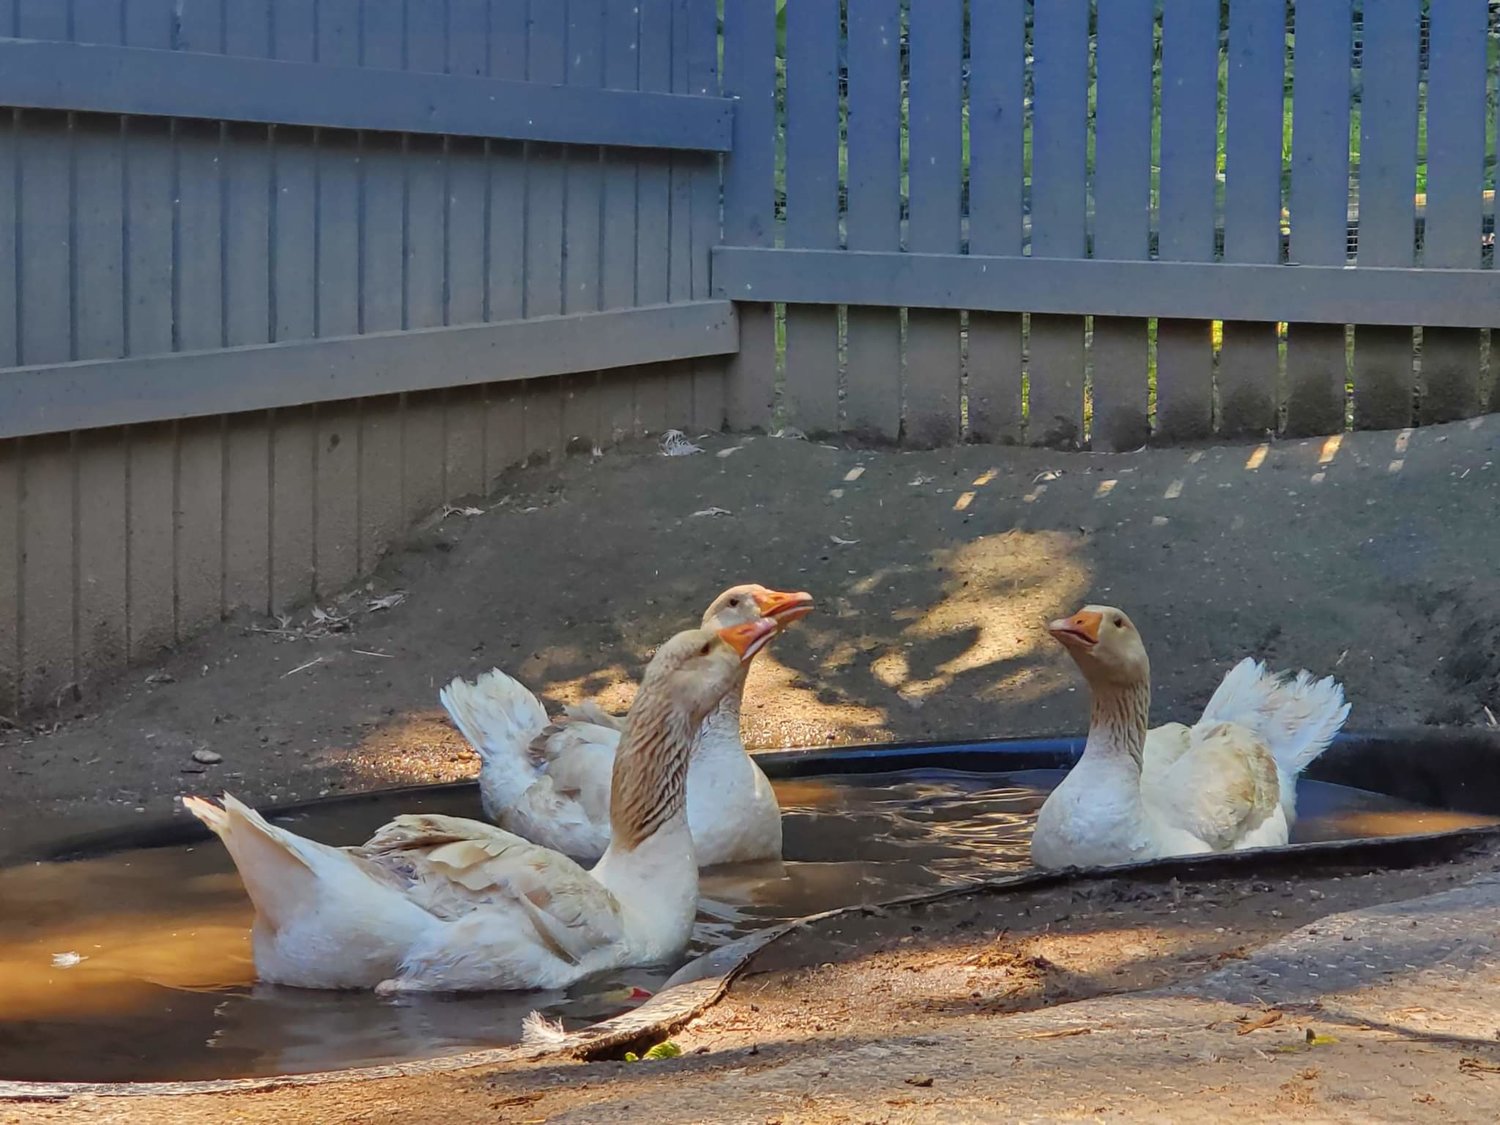 In the Town of Hempstead, it is illegal to own domestic water fowl. The geese, which suffered bruising and wing injuries, are now recovering, having been rescued by Humane Long Island.